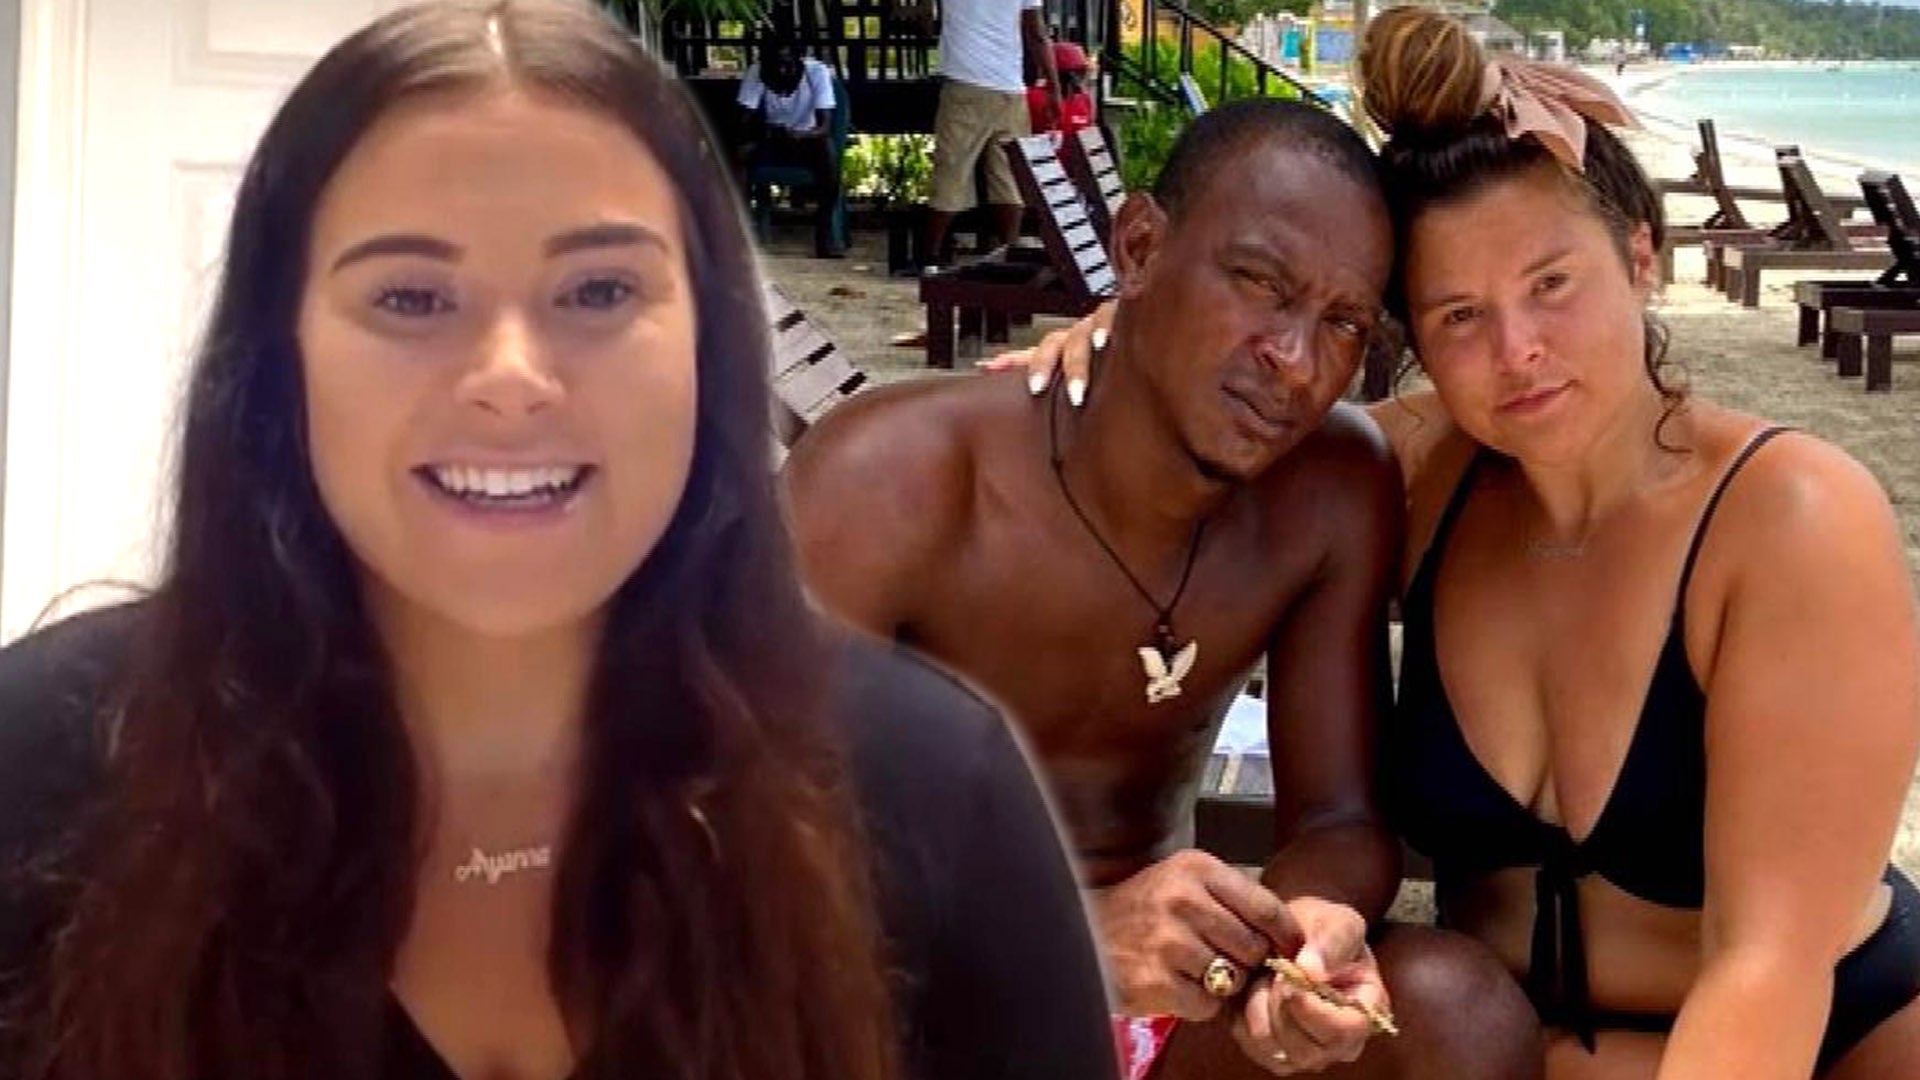 The Caribbean A 90 Day Story Star Aryanna on Boyfriend Sherlon Working at a Swingers Resort (Exclusive) Entertainment Tonight